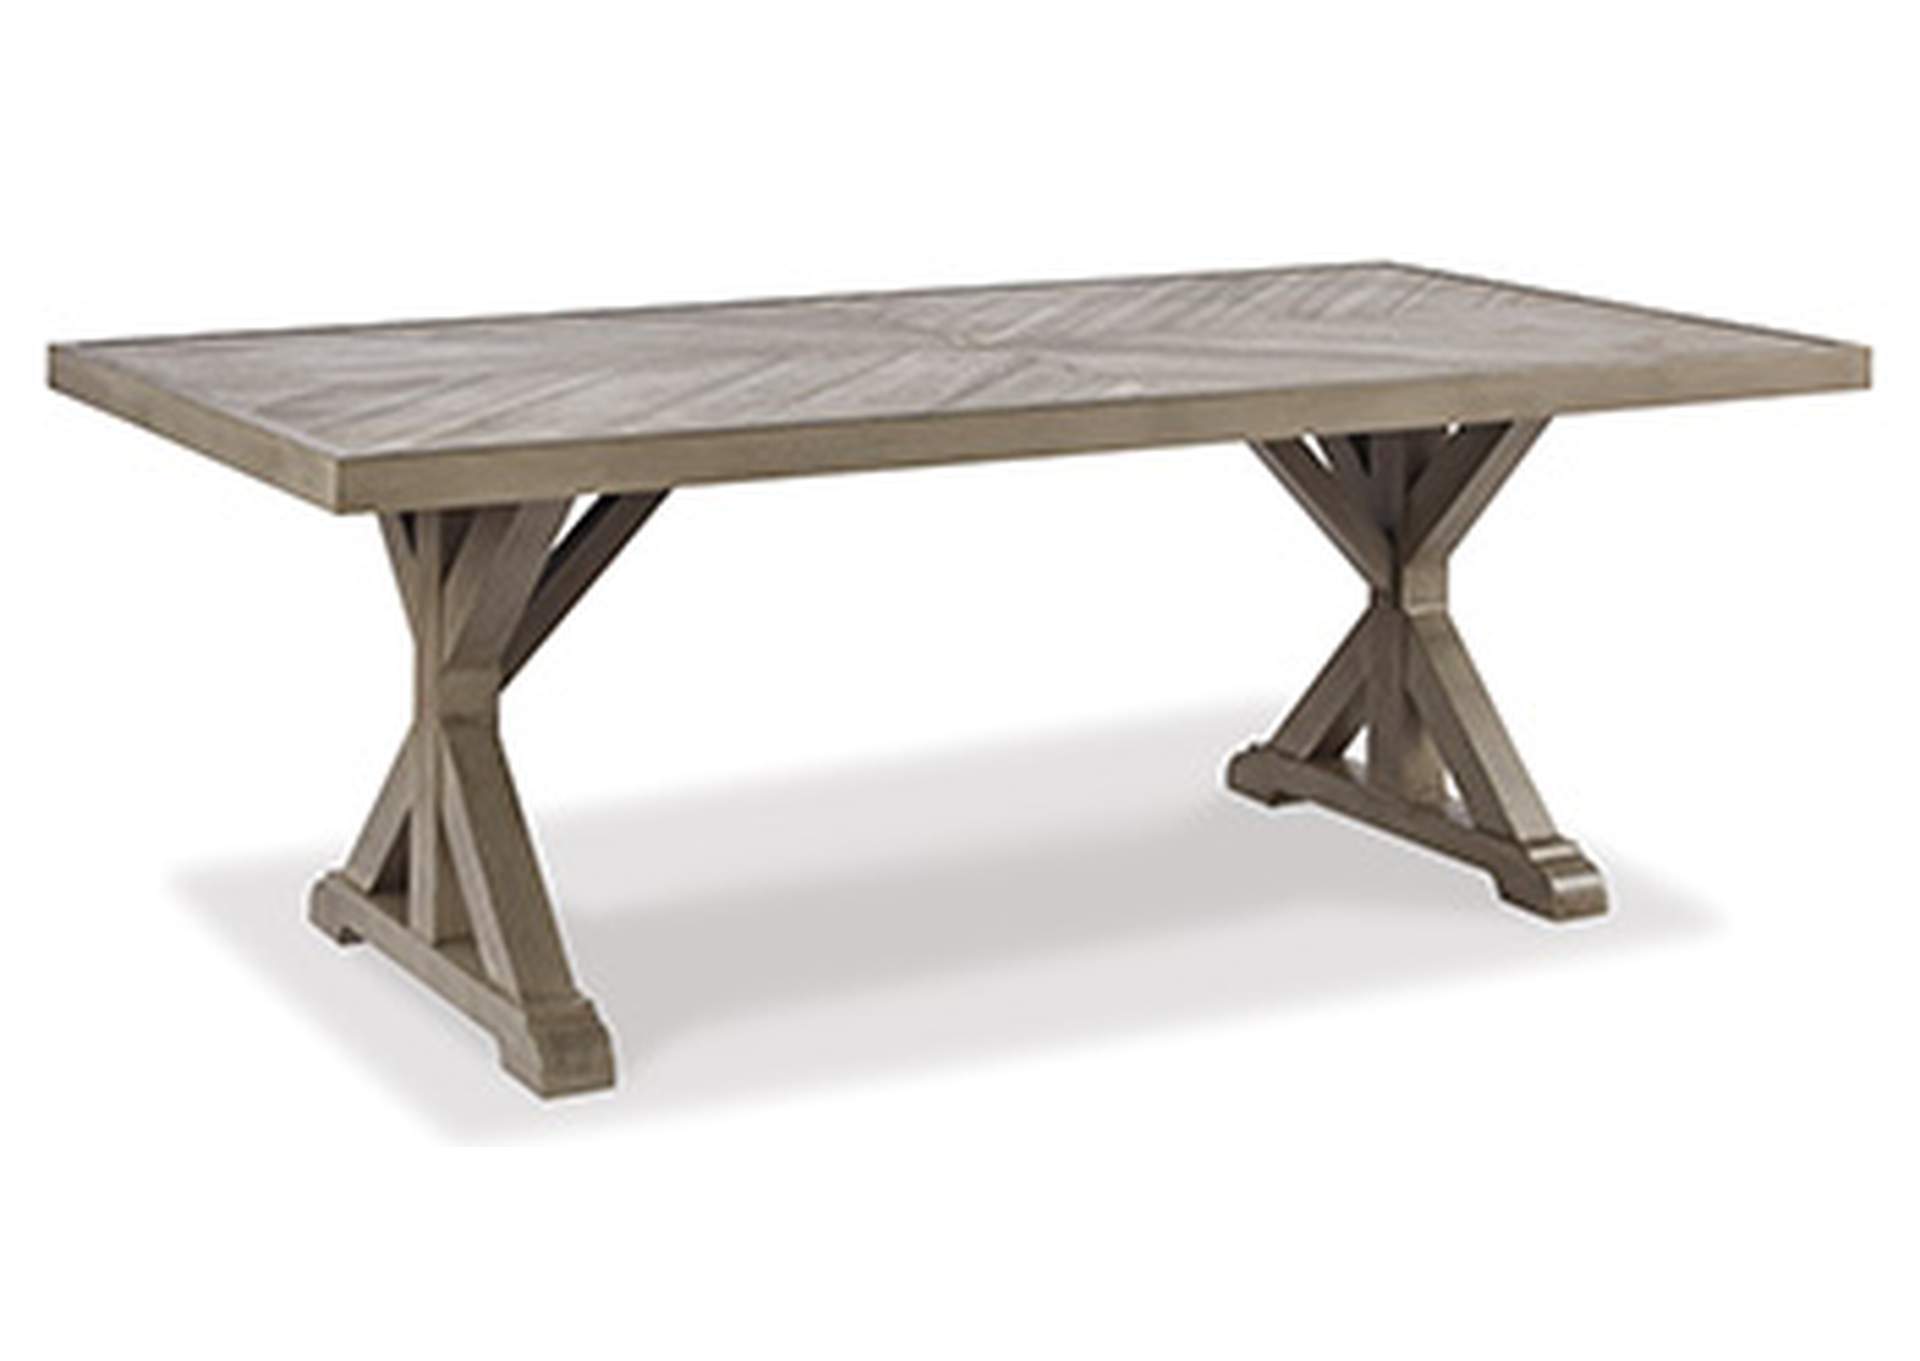 Beachcroft Dining Table with Umbrella Option,Outdoor By Ashley